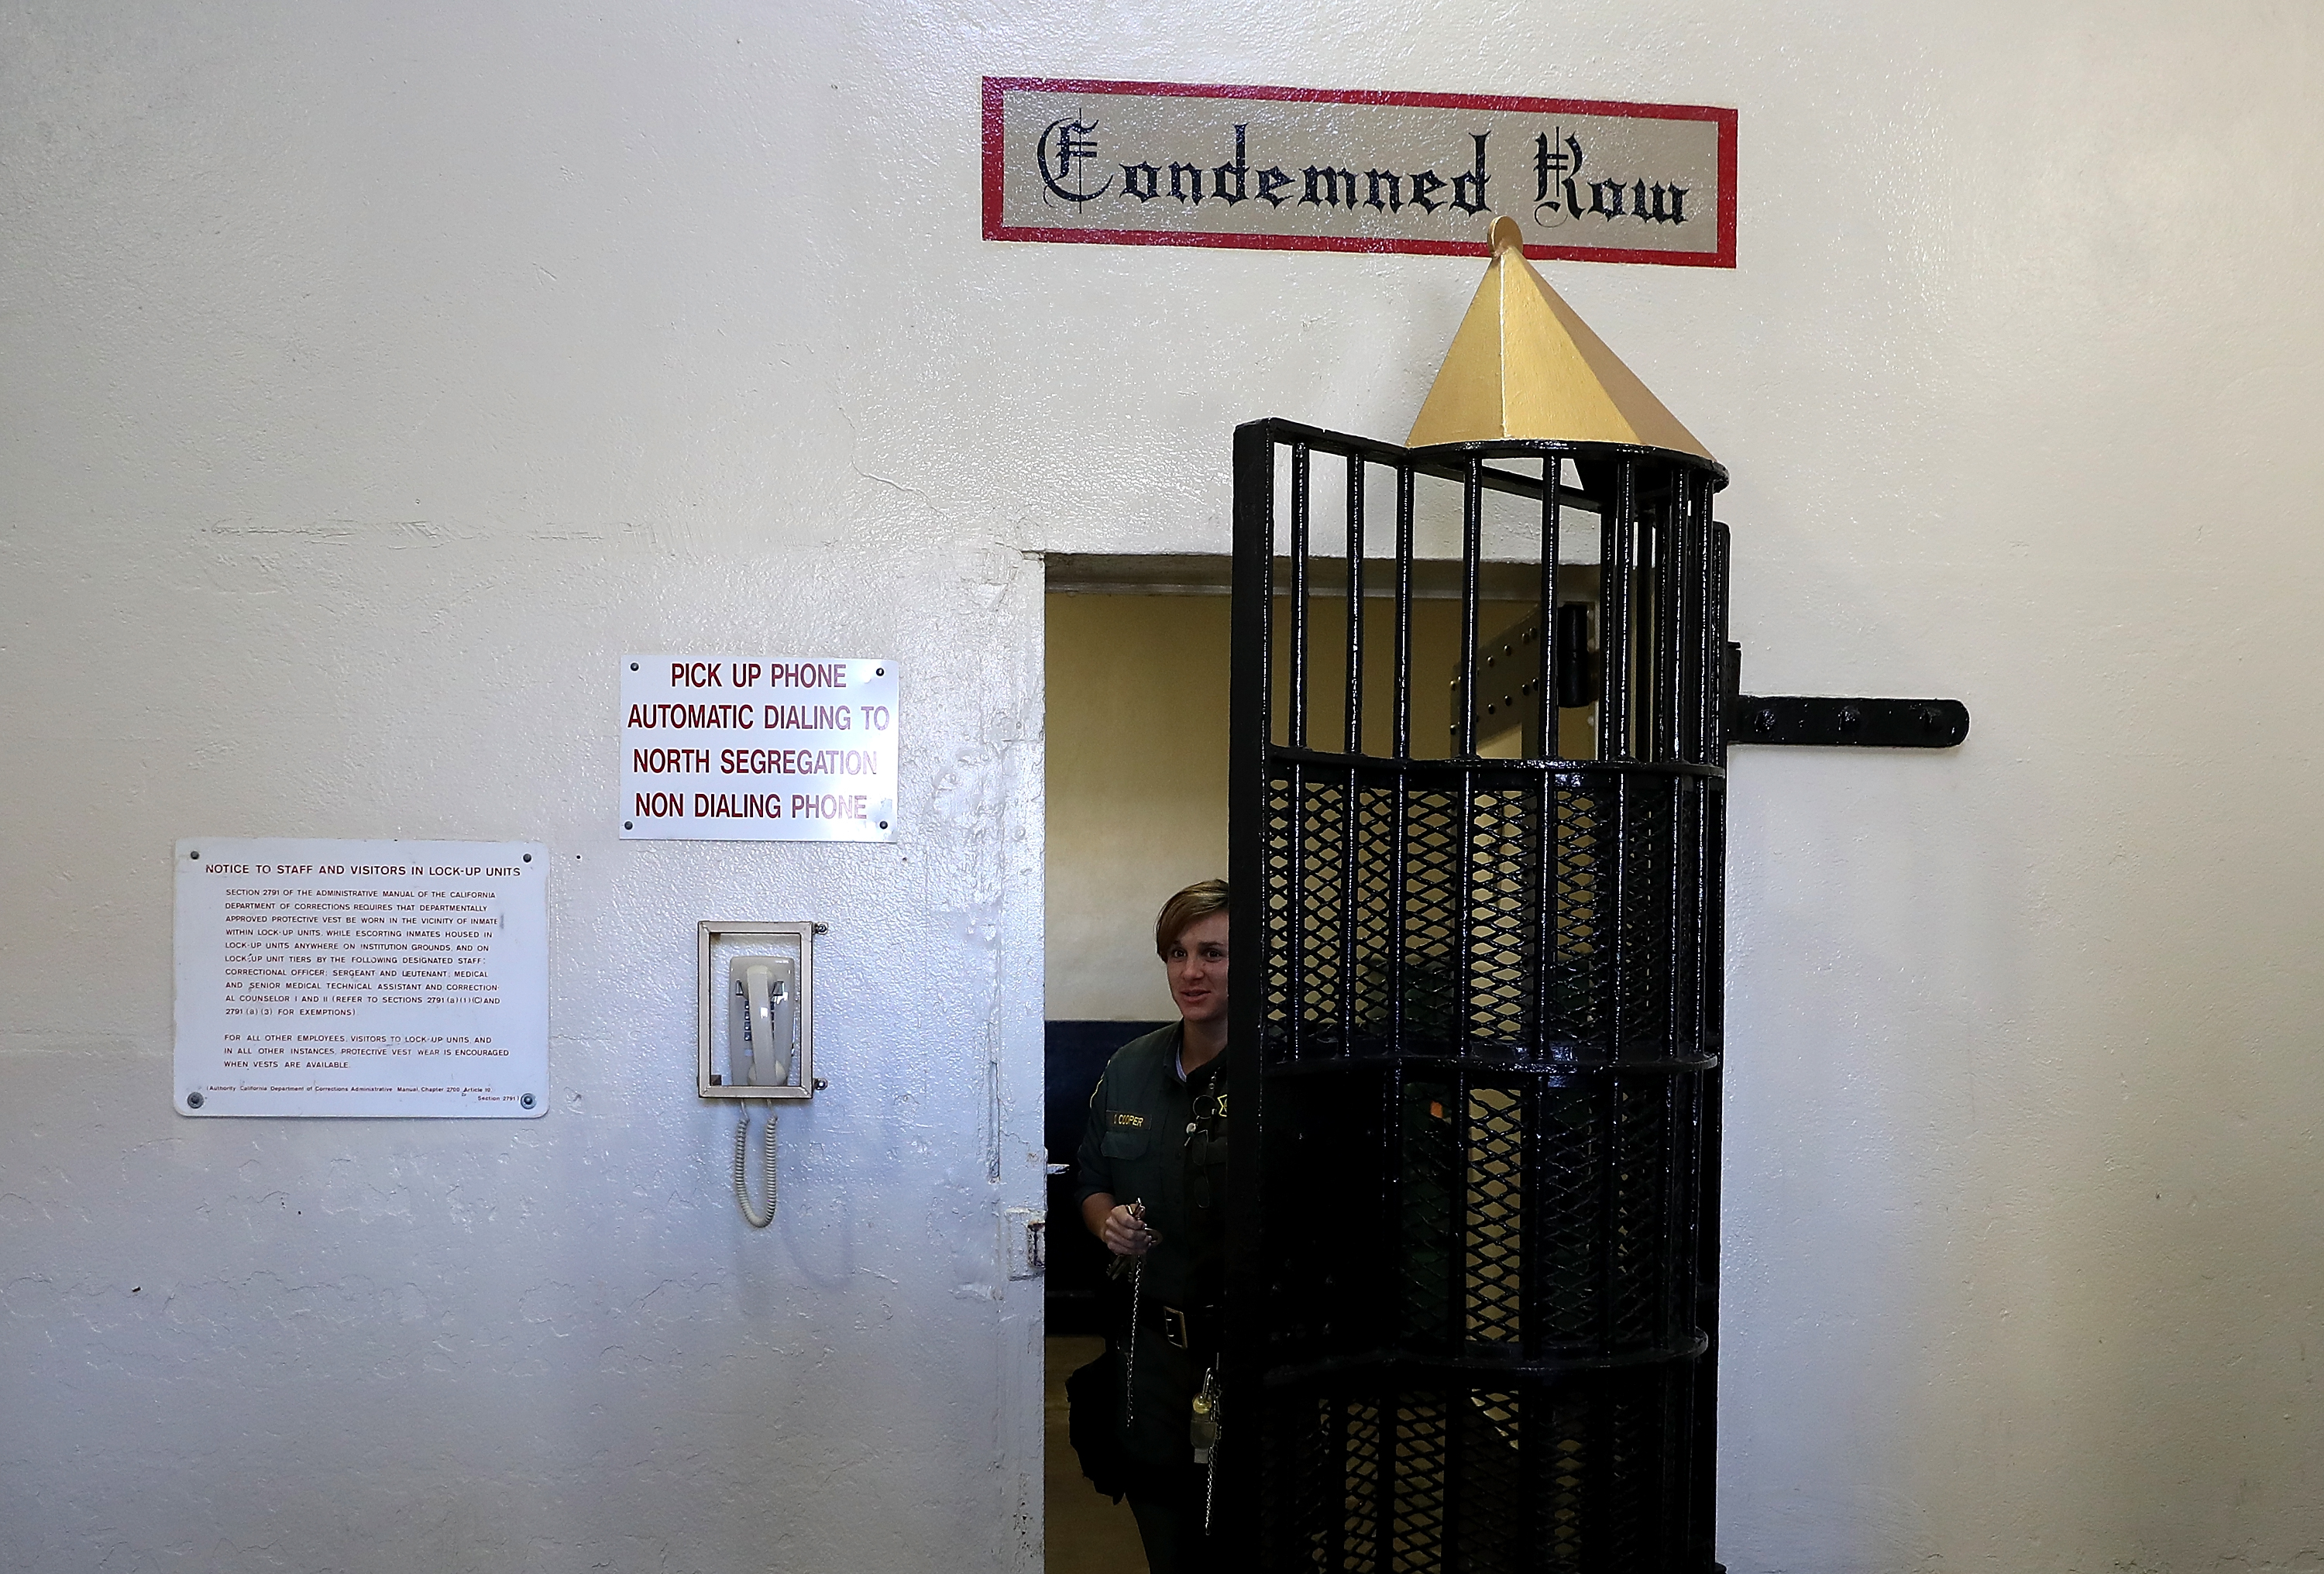 A California Department of Corrections and Rehabilitation (CDCR) officer opens the door to San Quentin State Prison's death row on August 15, 2016 in San Quentin, California. (Photo by Justin Sullivan/Getty Images)